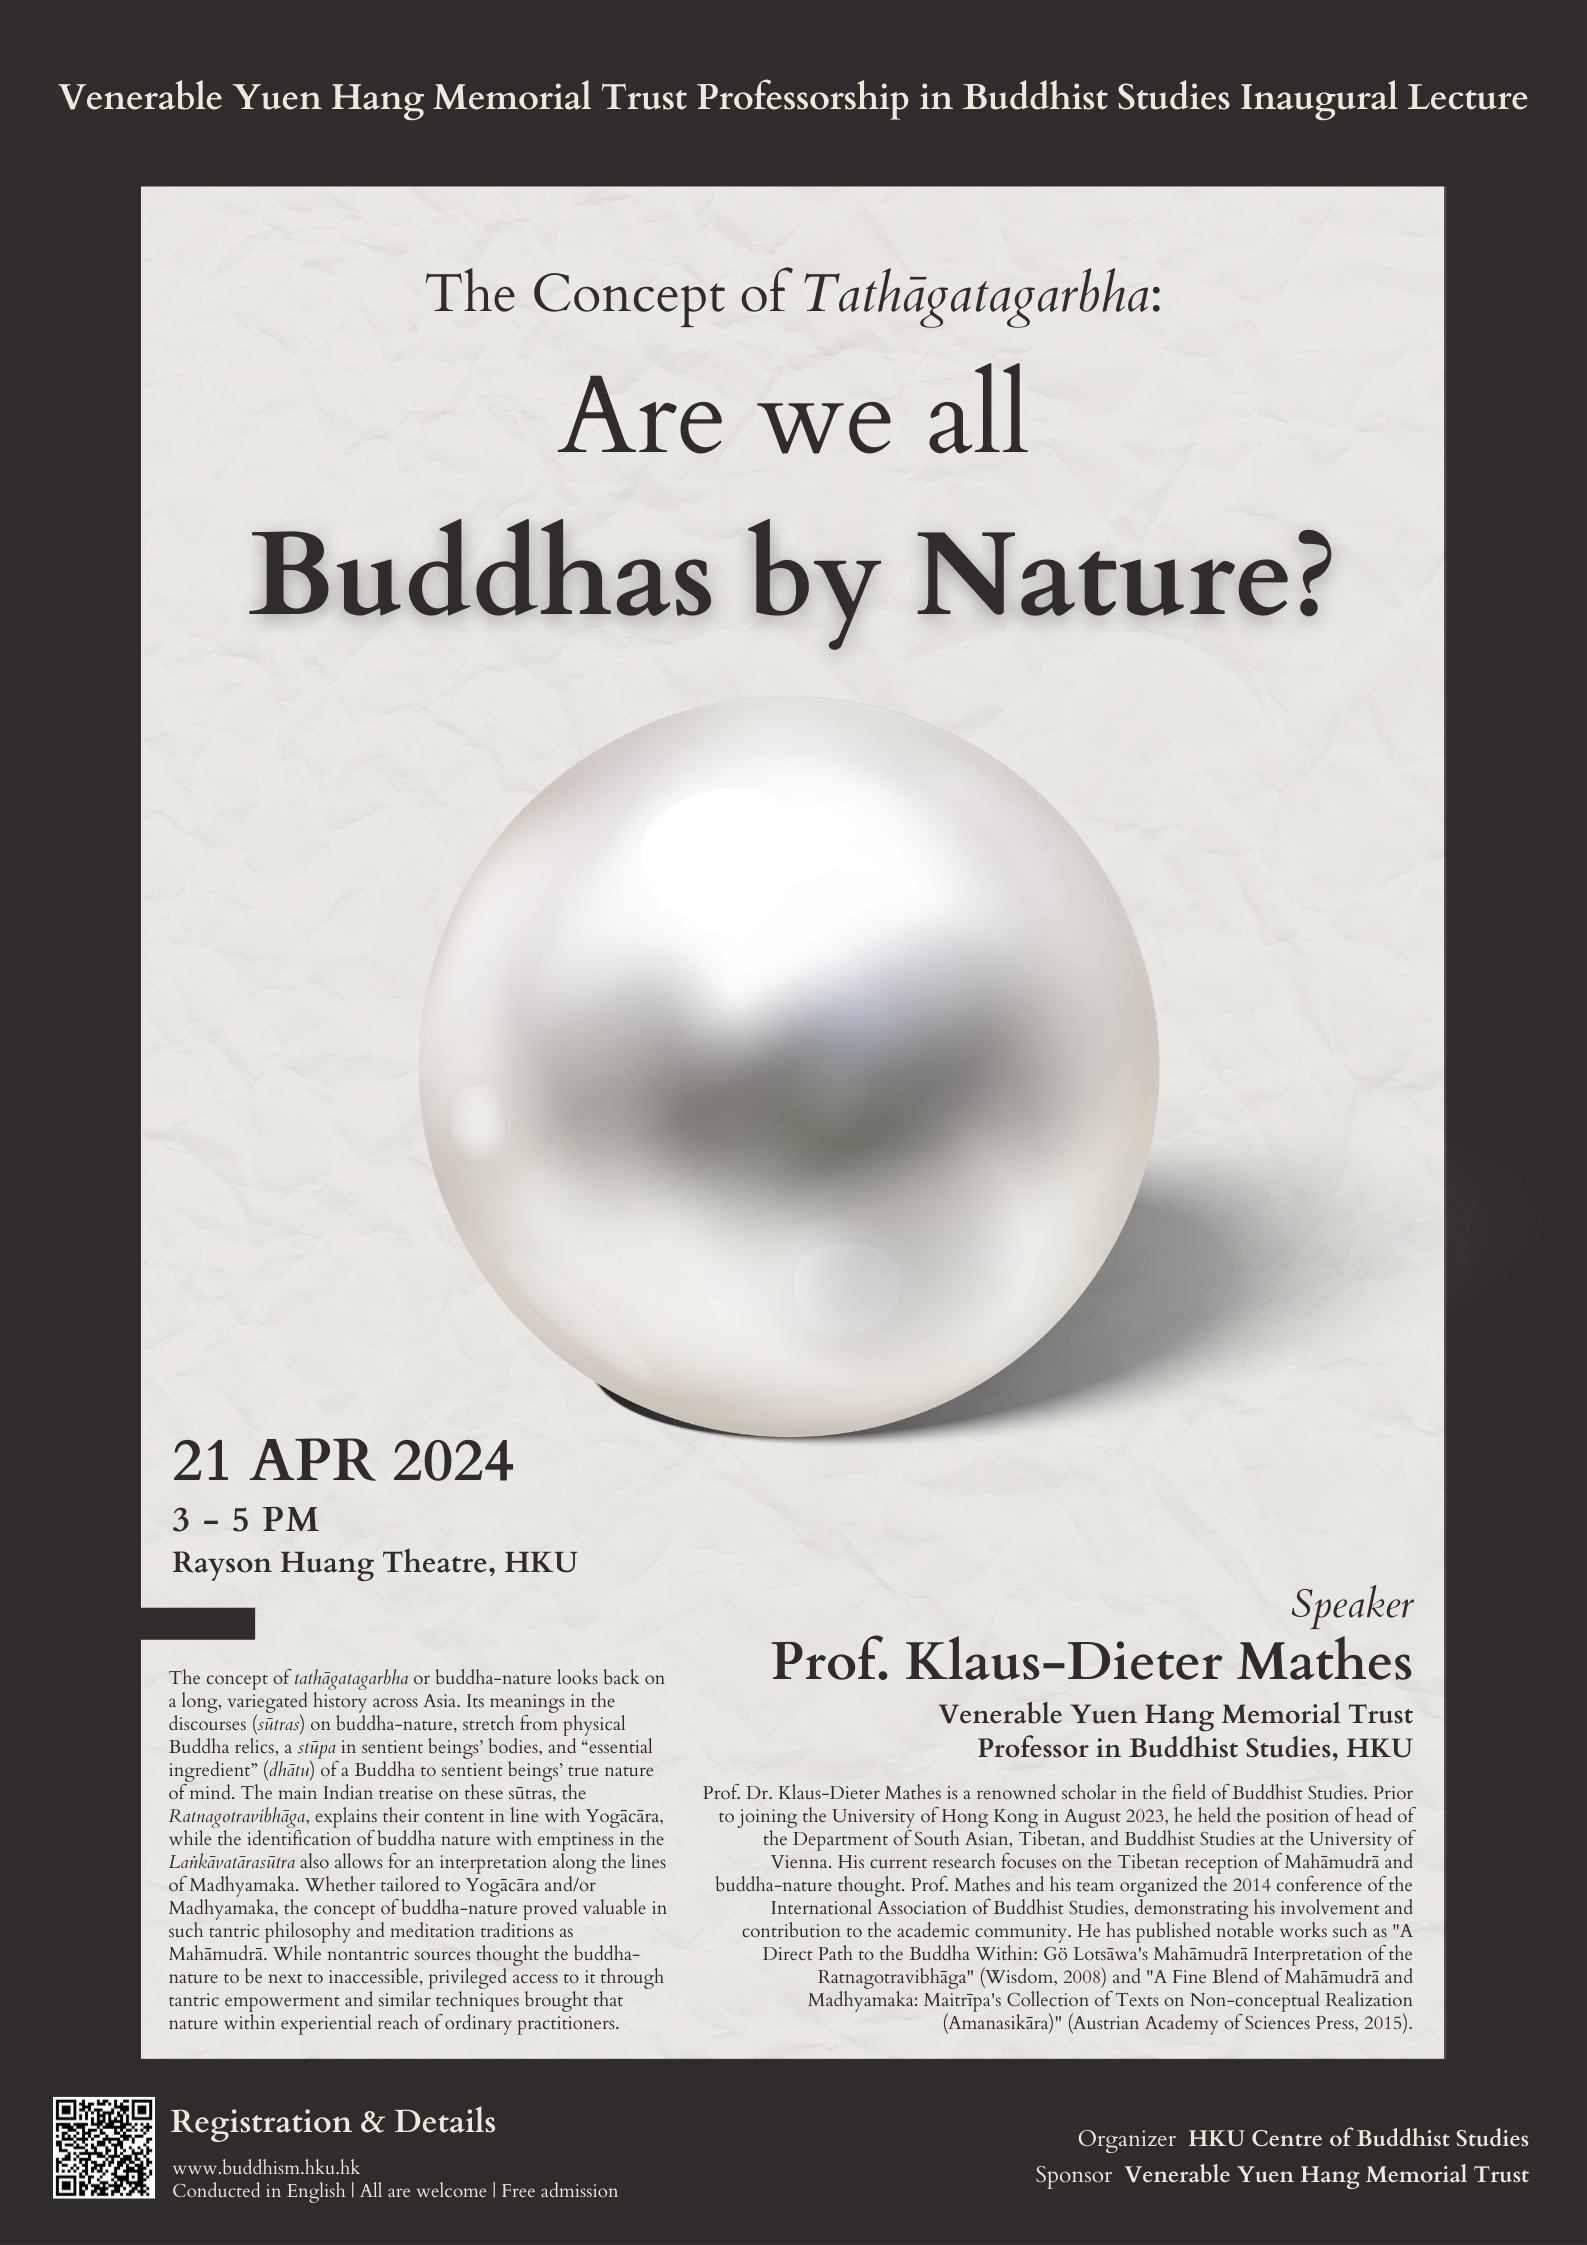 Venerable Yuen Hang Memorial Trust Professorship in Buddhist Studies Inaugural Lecture- The Concept of Tathāgatagarbha: Are we all Buddhas by Nature?